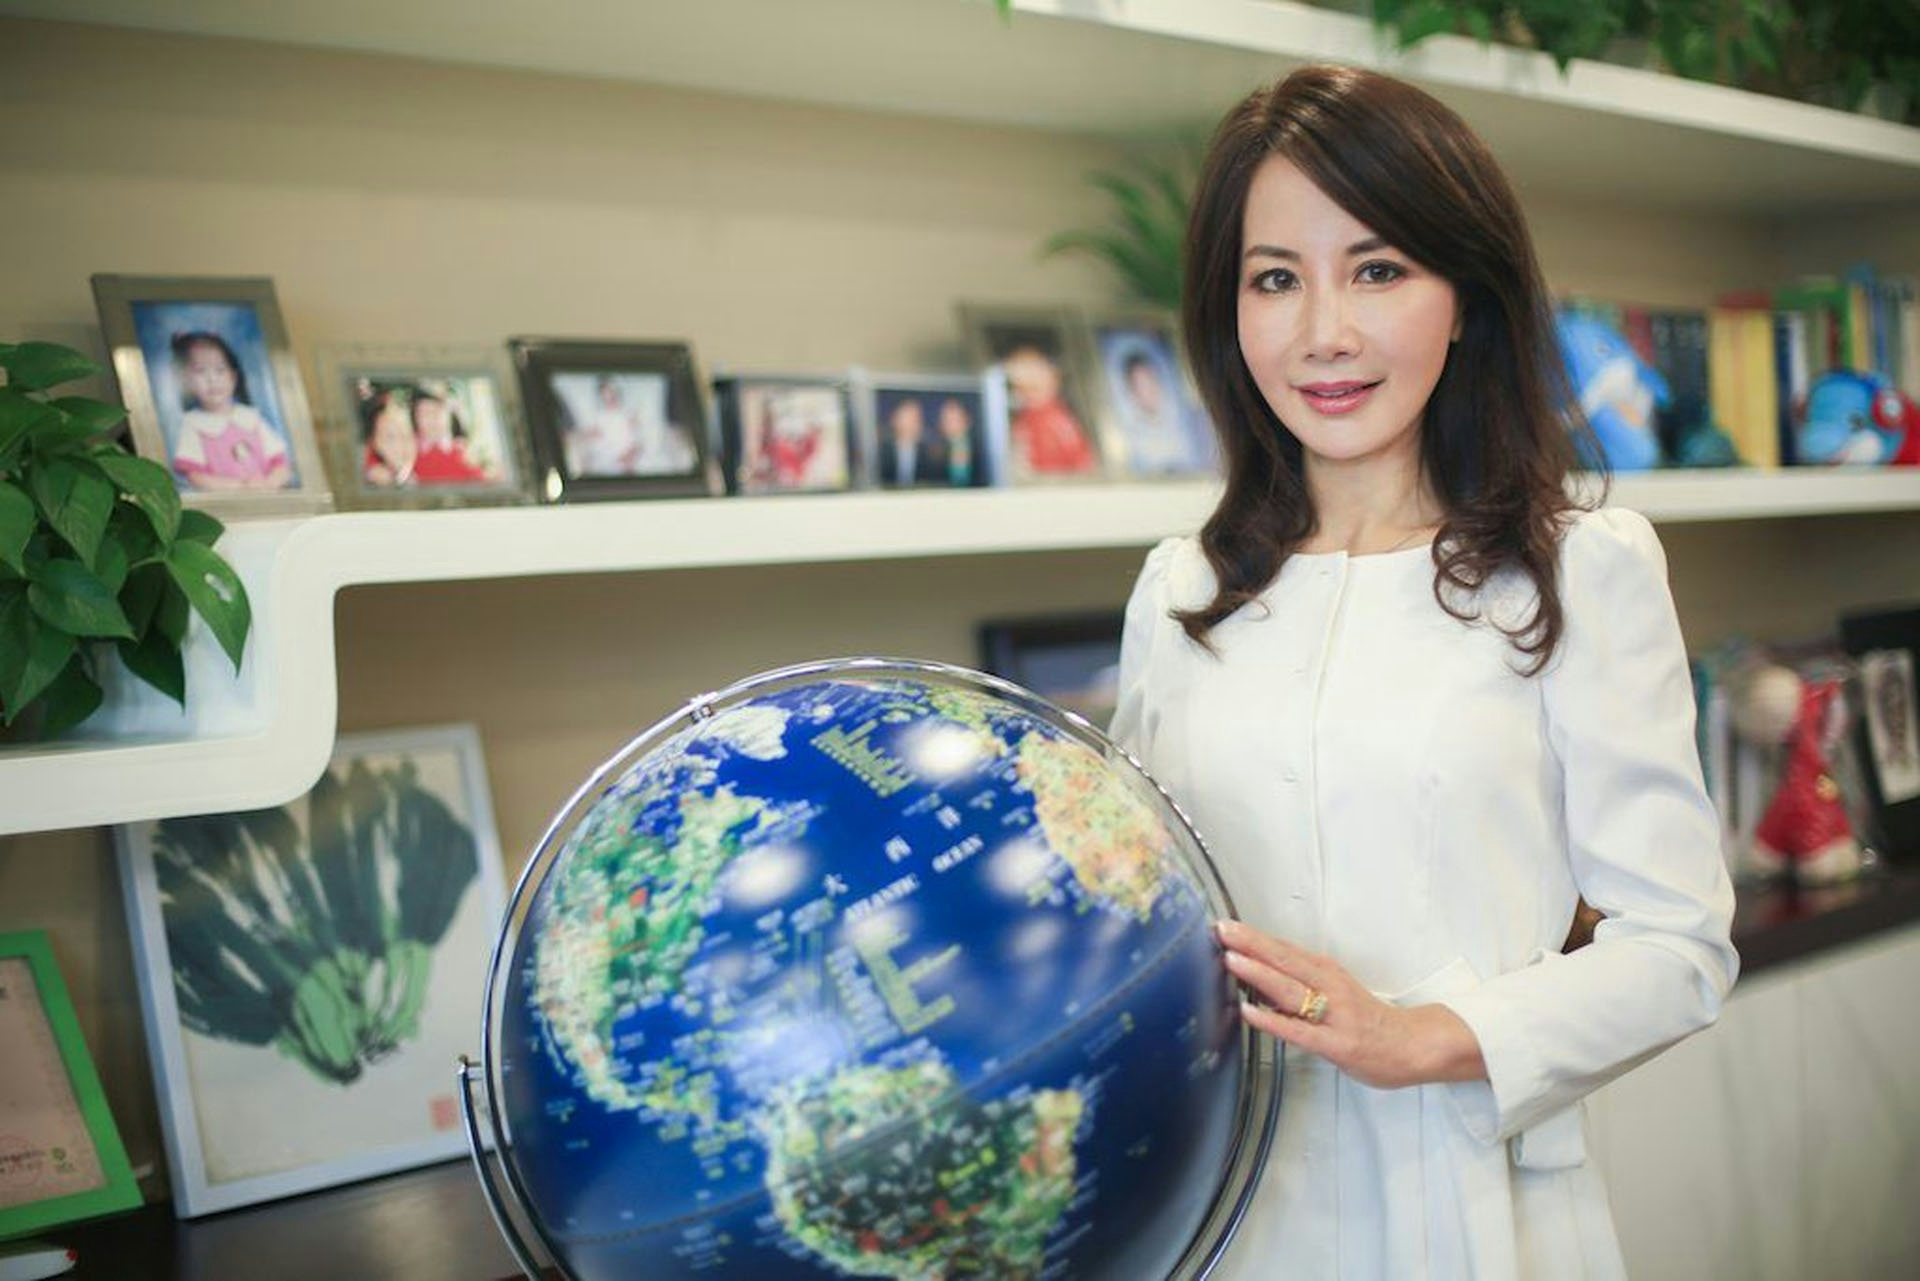 Ctrip CEO Jane Sun has global ambitions but it's mostly to accommodate Chinese travelers, wherever they wander. (Ctrip)